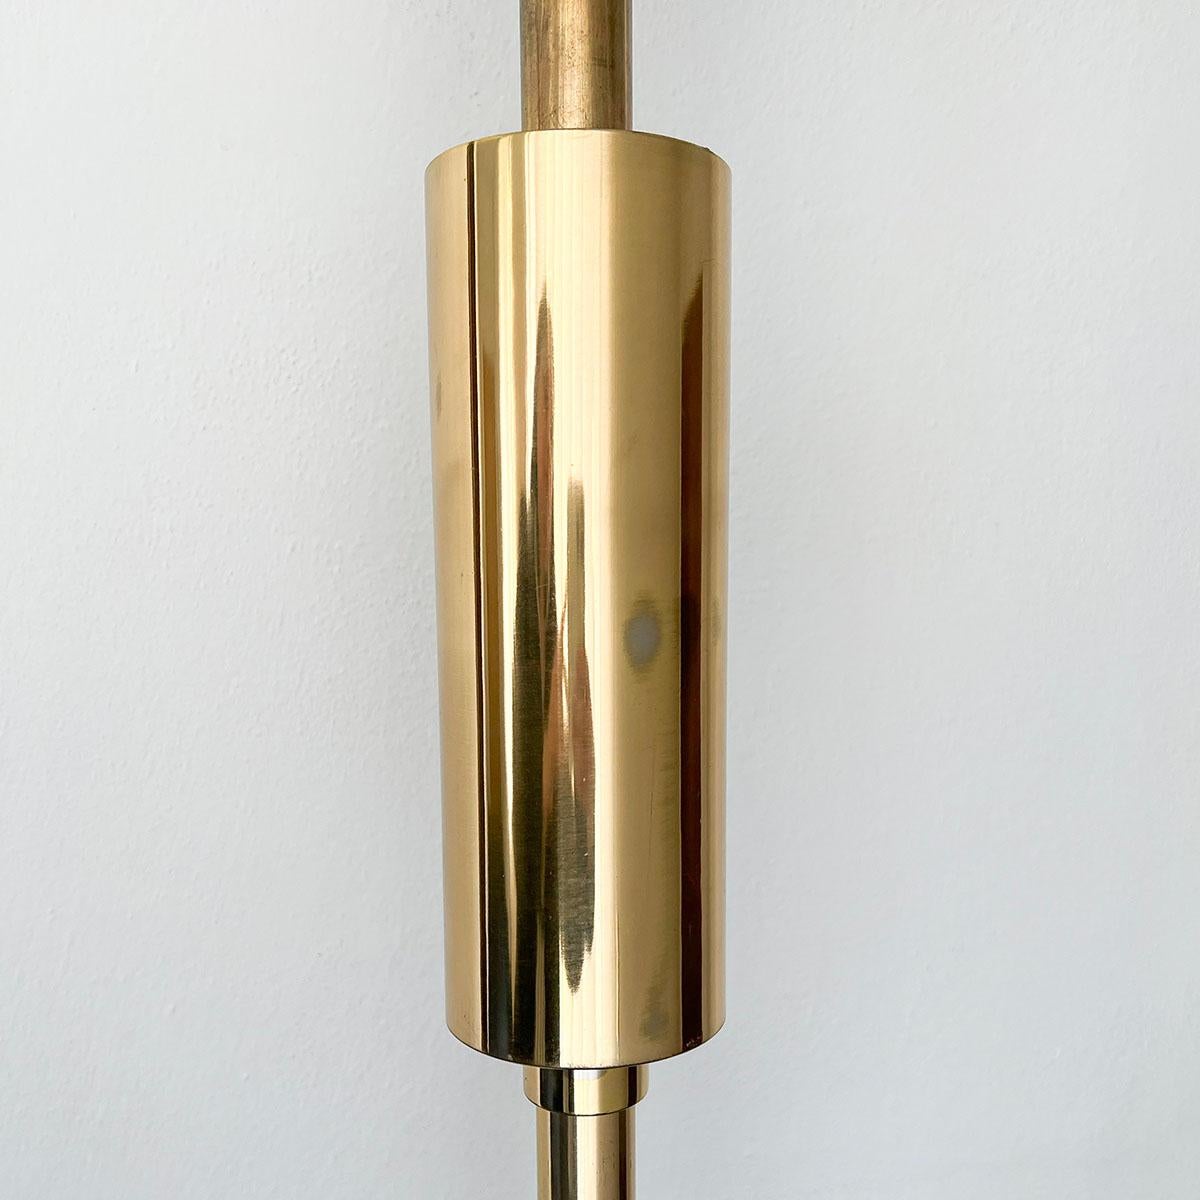 Large Sculptural Wall Torchiere in Brass and Milk Glass, 1930s For Sale 1